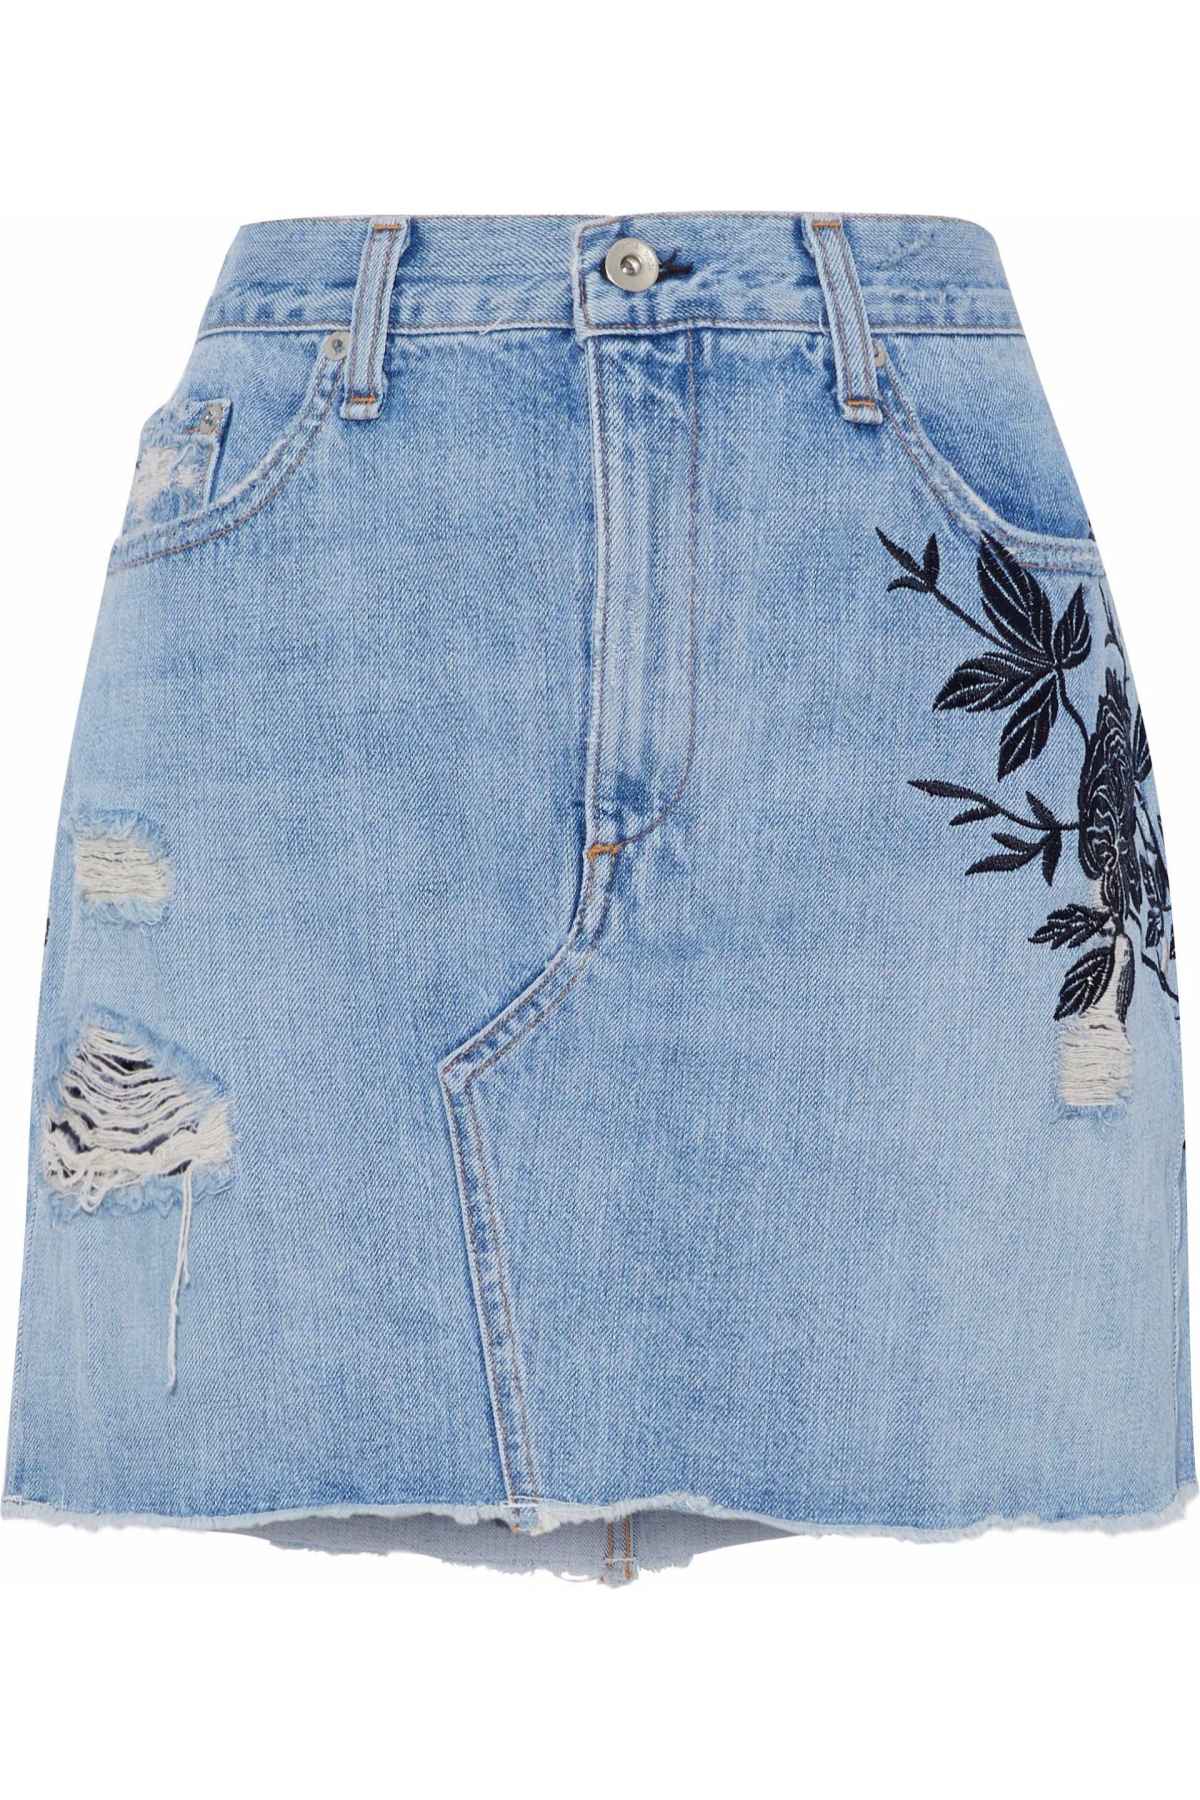 50% Off Rag and Bone Dresses, Shoes, Jeans | Us Weekly